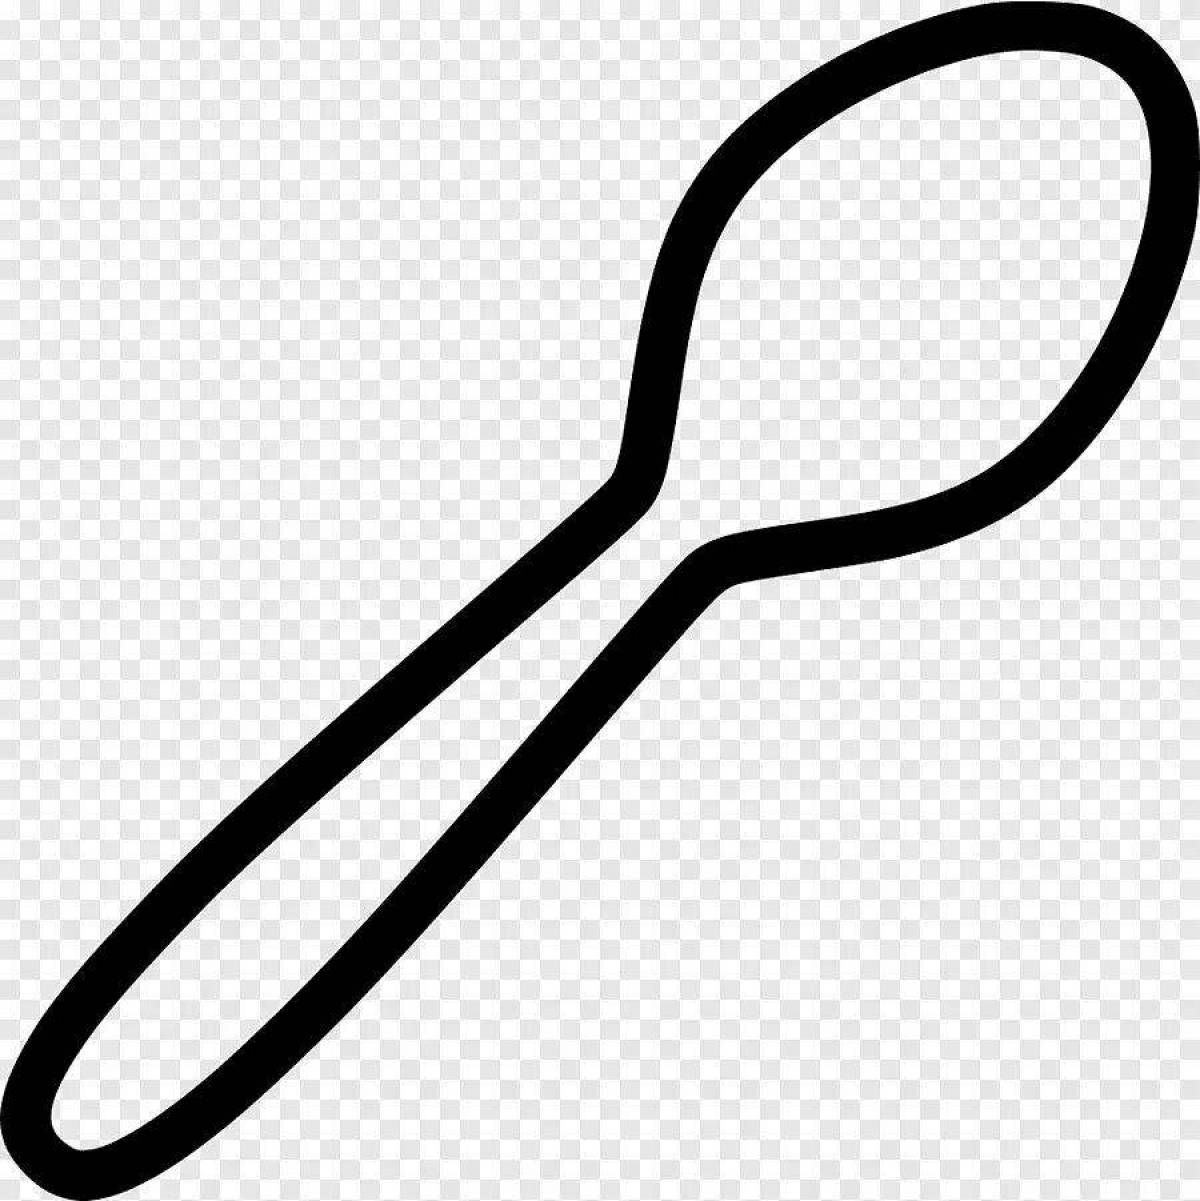 Animated spoon coloring page for kids